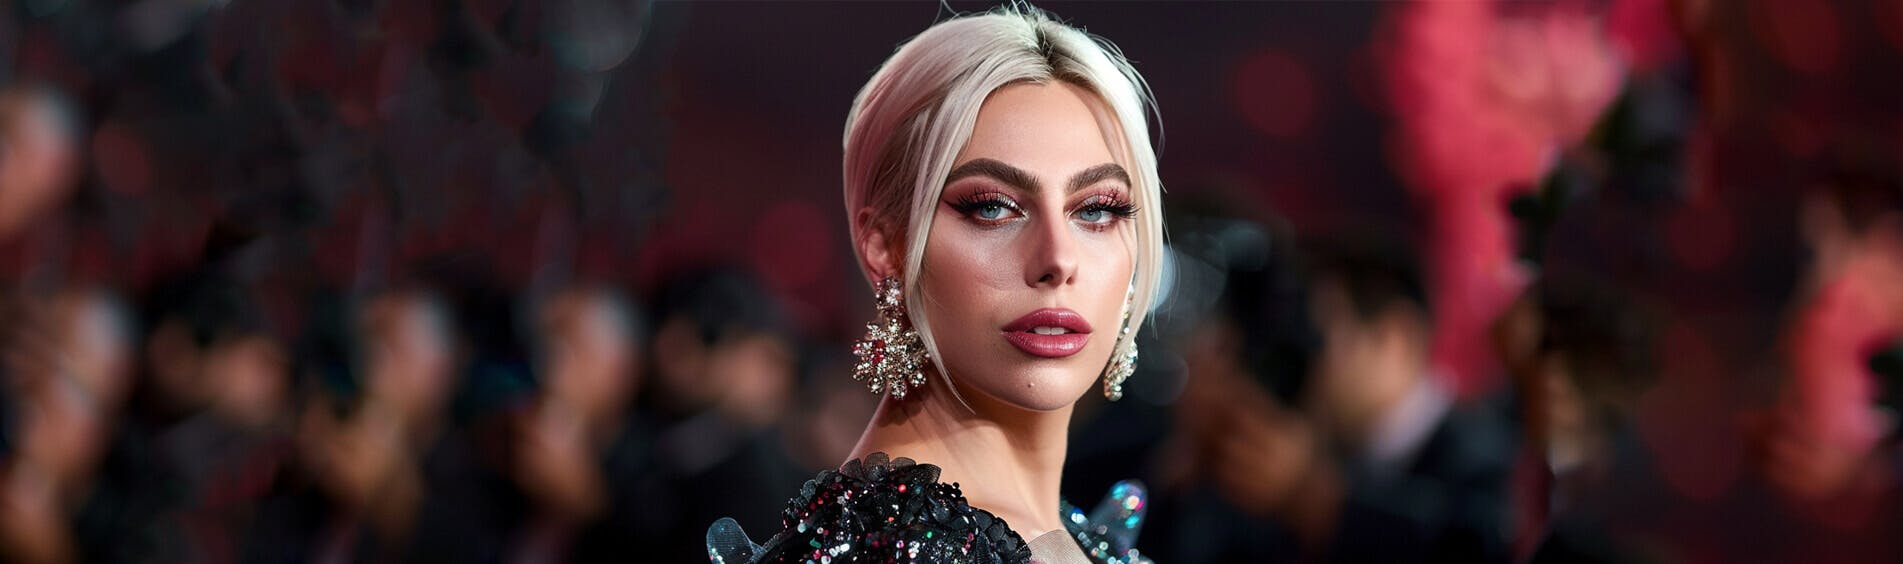 Cover Image for “Chromatica Ball” Is Going To Stream On HBO: Posts Lady Gaga On Her Instagram Handle